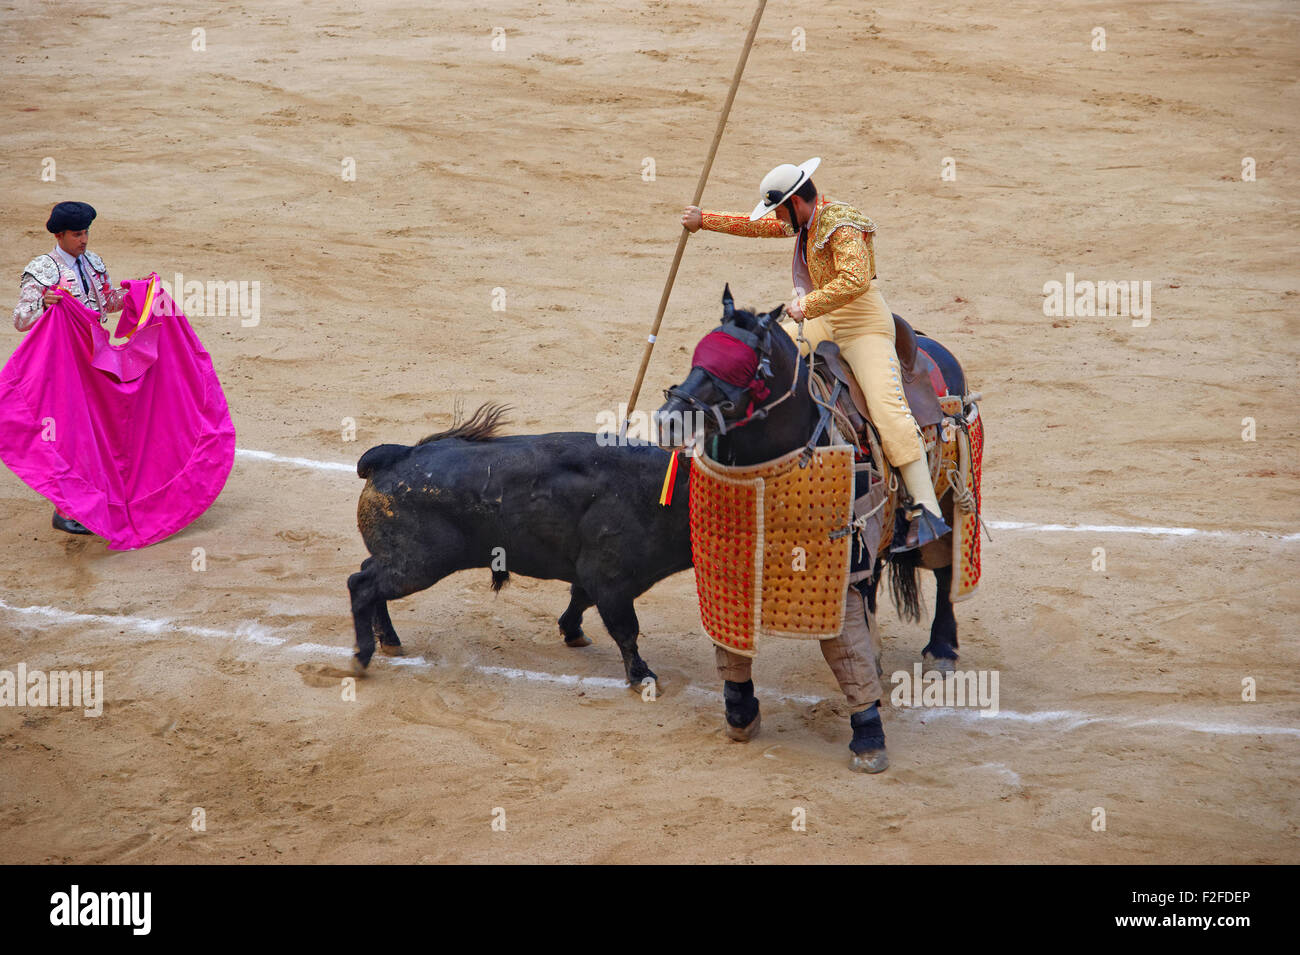 BARCELONA, SPAIN - AUGUST 01, 2010: Bull is attacking the matador (torero) during a bullfight in the Plaza Monumental de Barcelo Stock Photo